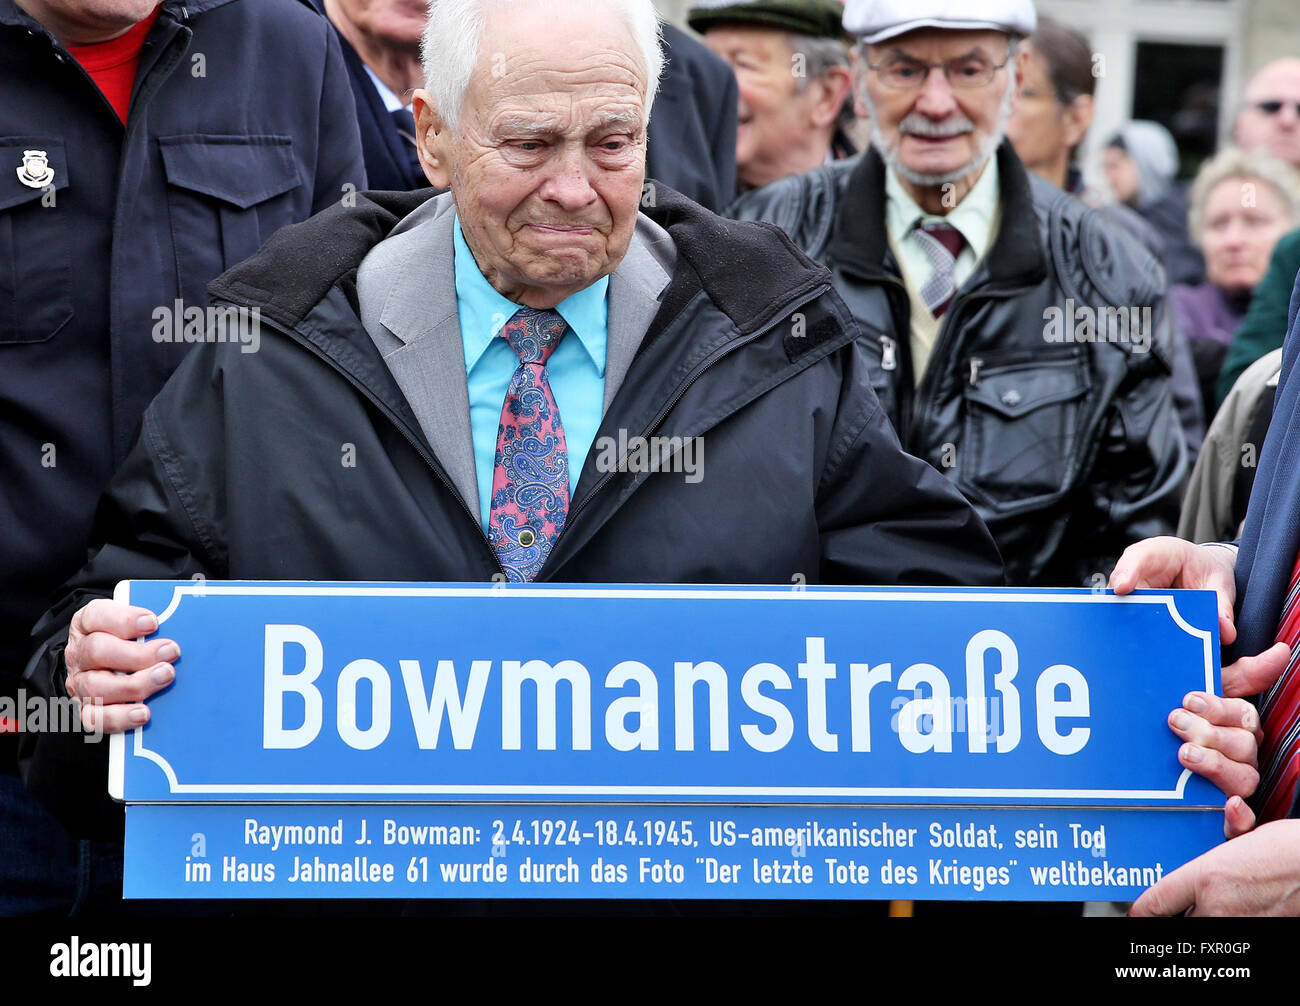 US veteran Lehman Riggs holds up a sign for a street named after his dead comrade Bowman in front of the Capa House in Leipzig, Germany, 17 April 2016. The building, now also known as Capa House, became famous internationally through the picture 'Last man to die' by US war photographer Robert Capa. He documented how US soldier Raymond J. Bowman was shot dead on the second floor balcony on 18 April 1945 as US forces liberated Leipzig. The building was overhauled after years of decay, with an exhibition now showcasing the history of the building. Photo: JAN WOITAS/dpa Stock Photo